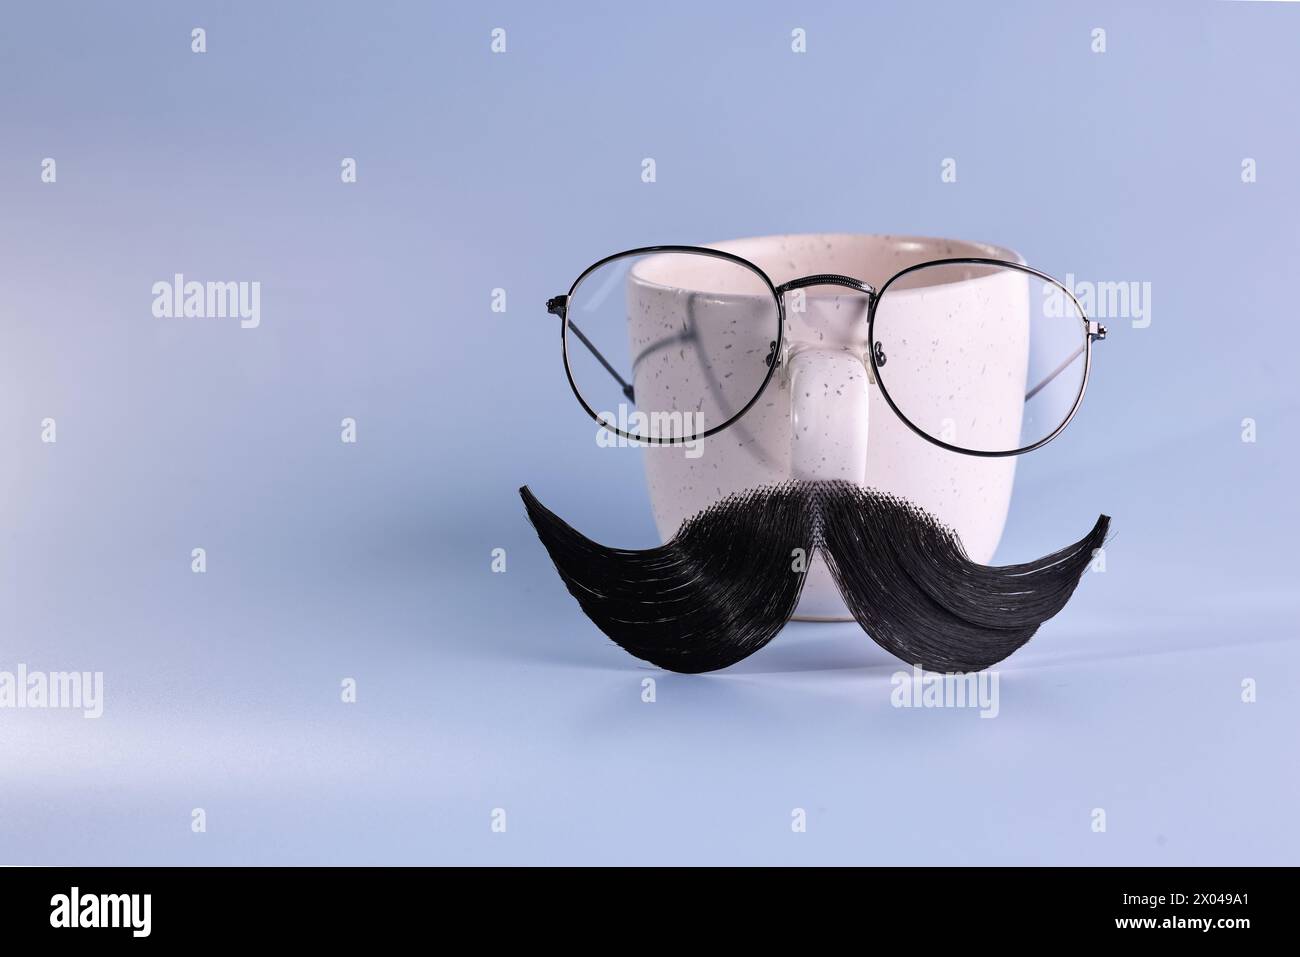 Man's face made of artificial mustache, glasses and cup on light blue background. Space for text Stock Photo